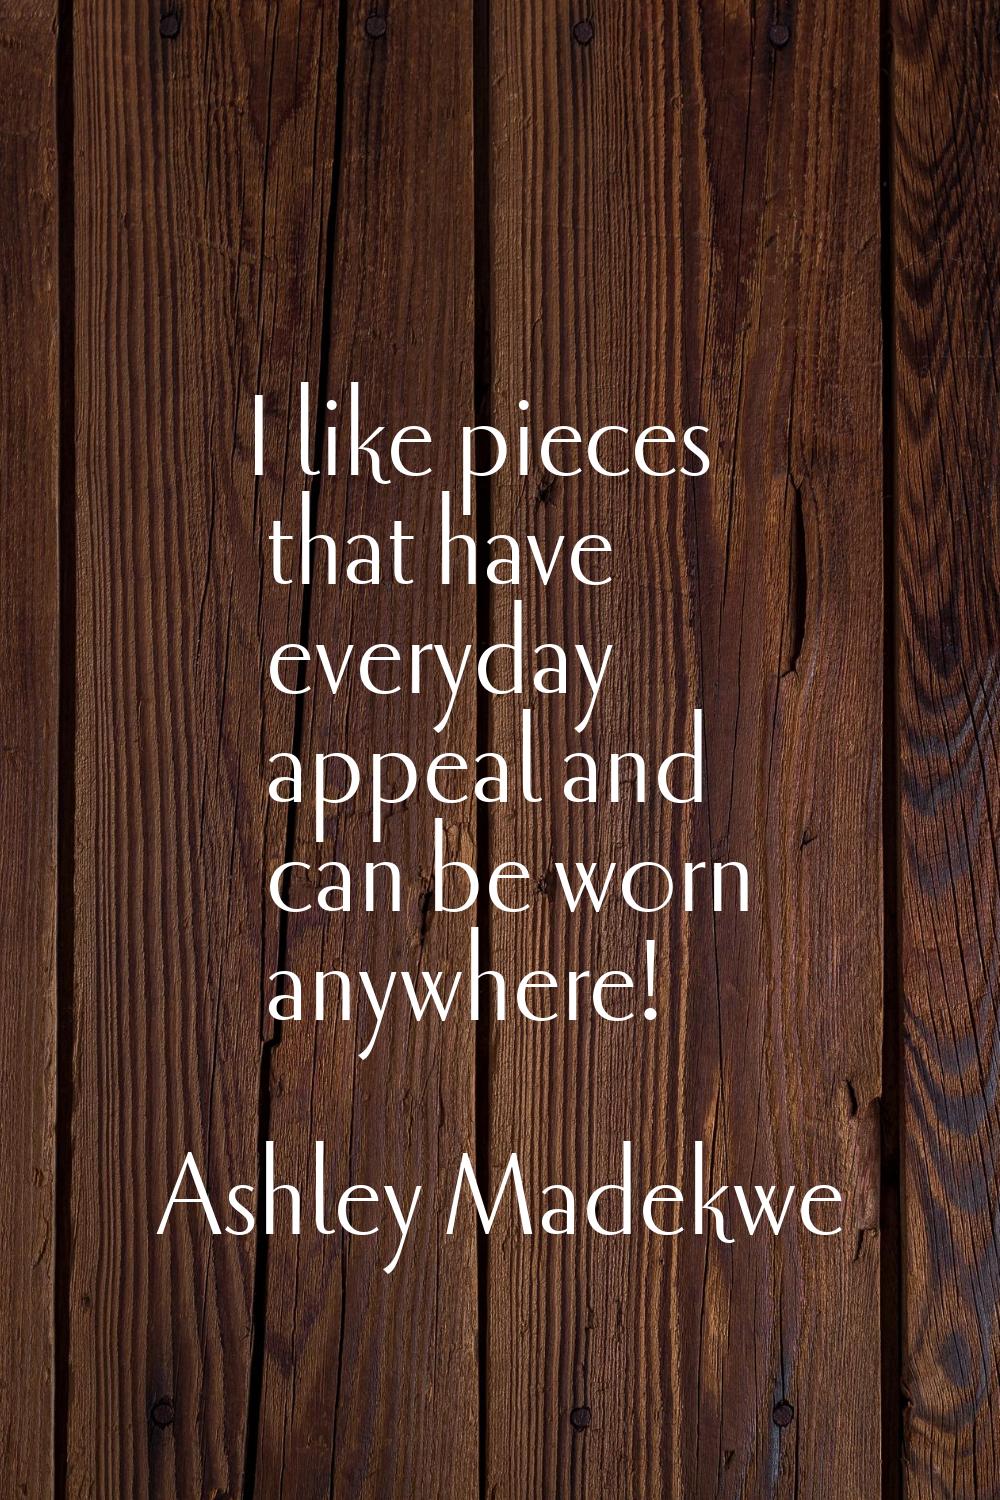 I like pieces that have everyday appeal and can be worn anywhere!